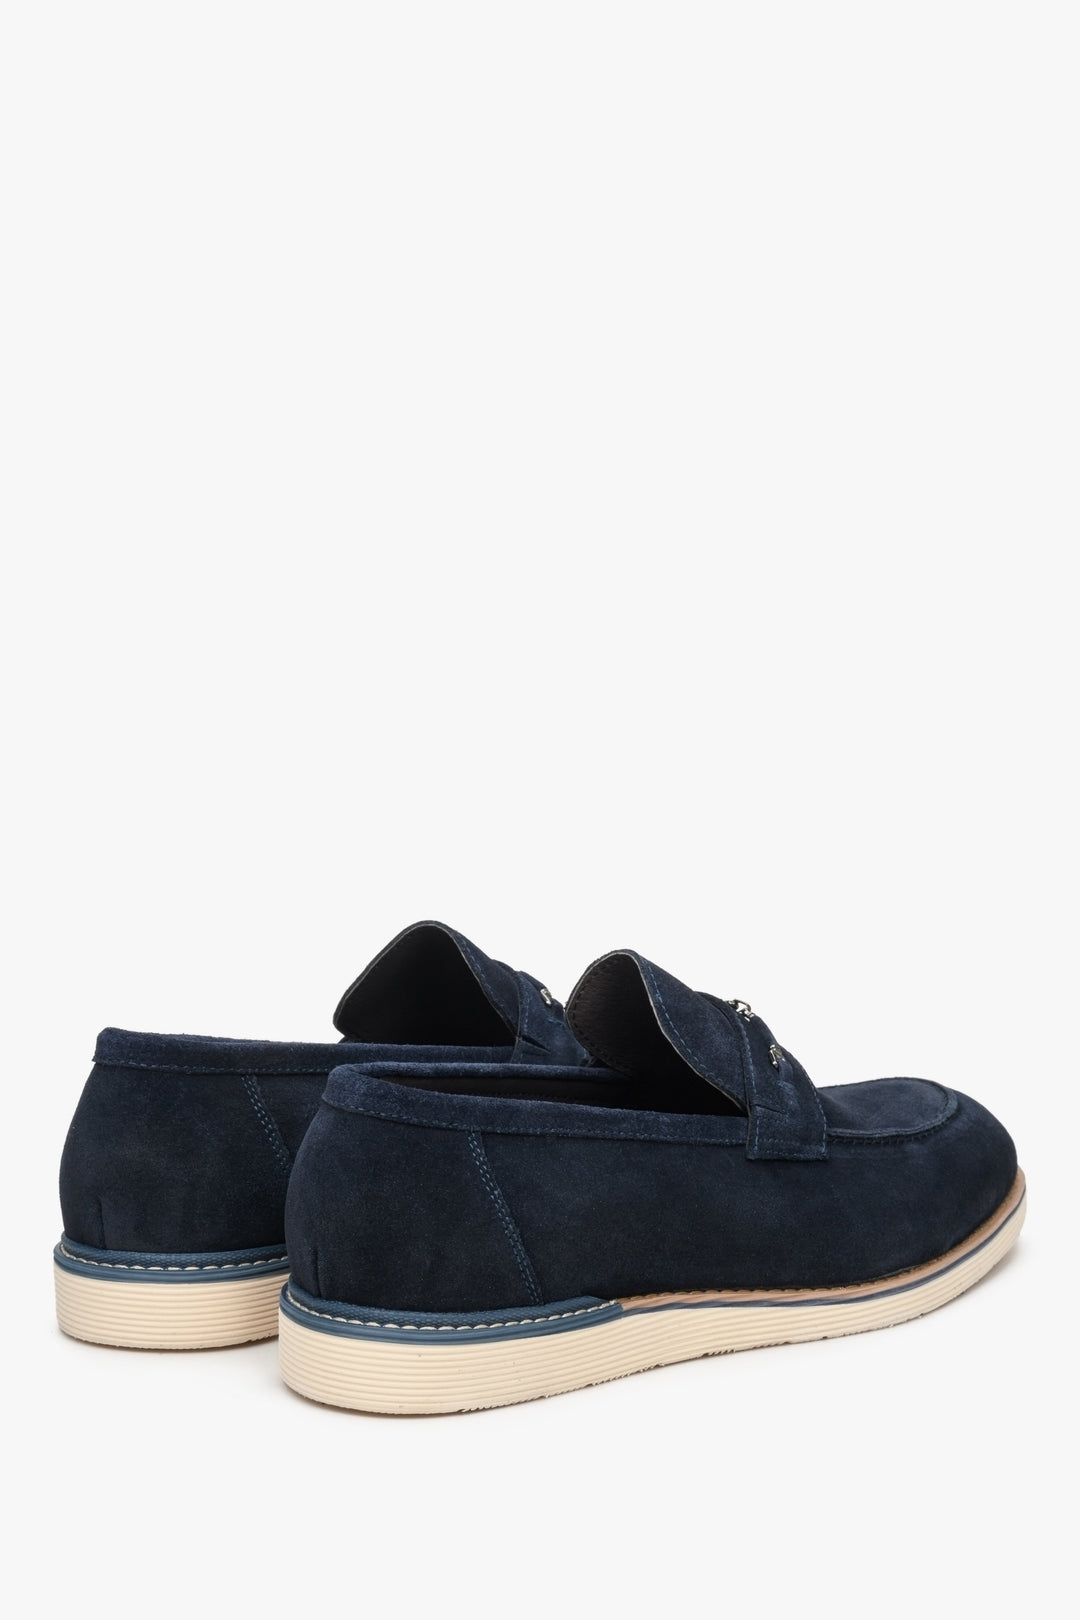 Estro men's spring and fall navy blue velvet loafers made of natural velour - presentation of the heel and side seam of the shoes.